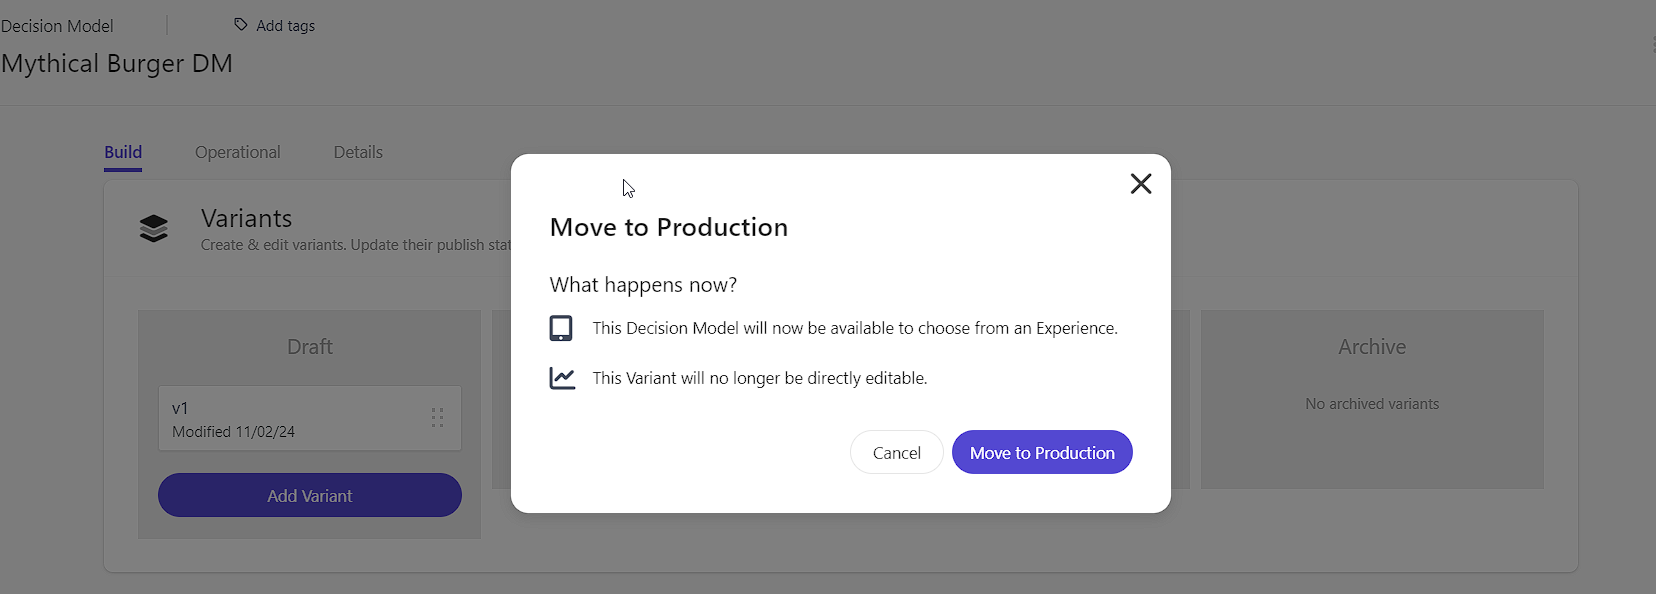 Popup window with the title 'Move to Production' explaining the effects of the action on the decision model.